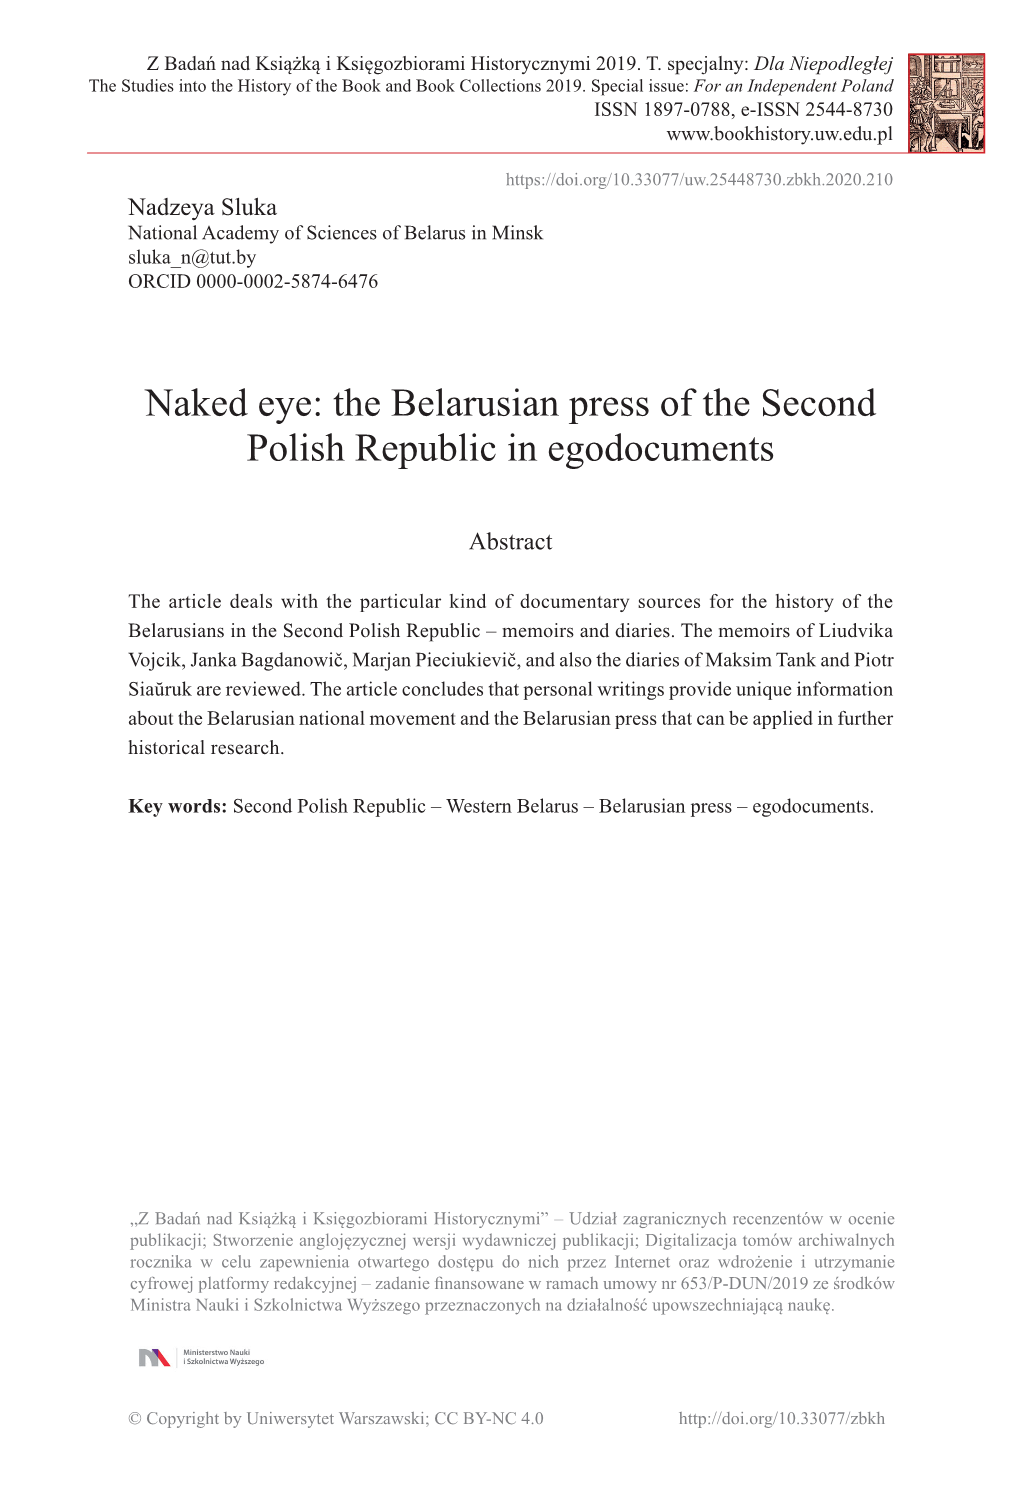 The Belarusian Press of the Second Polish Republic in Egodocuments